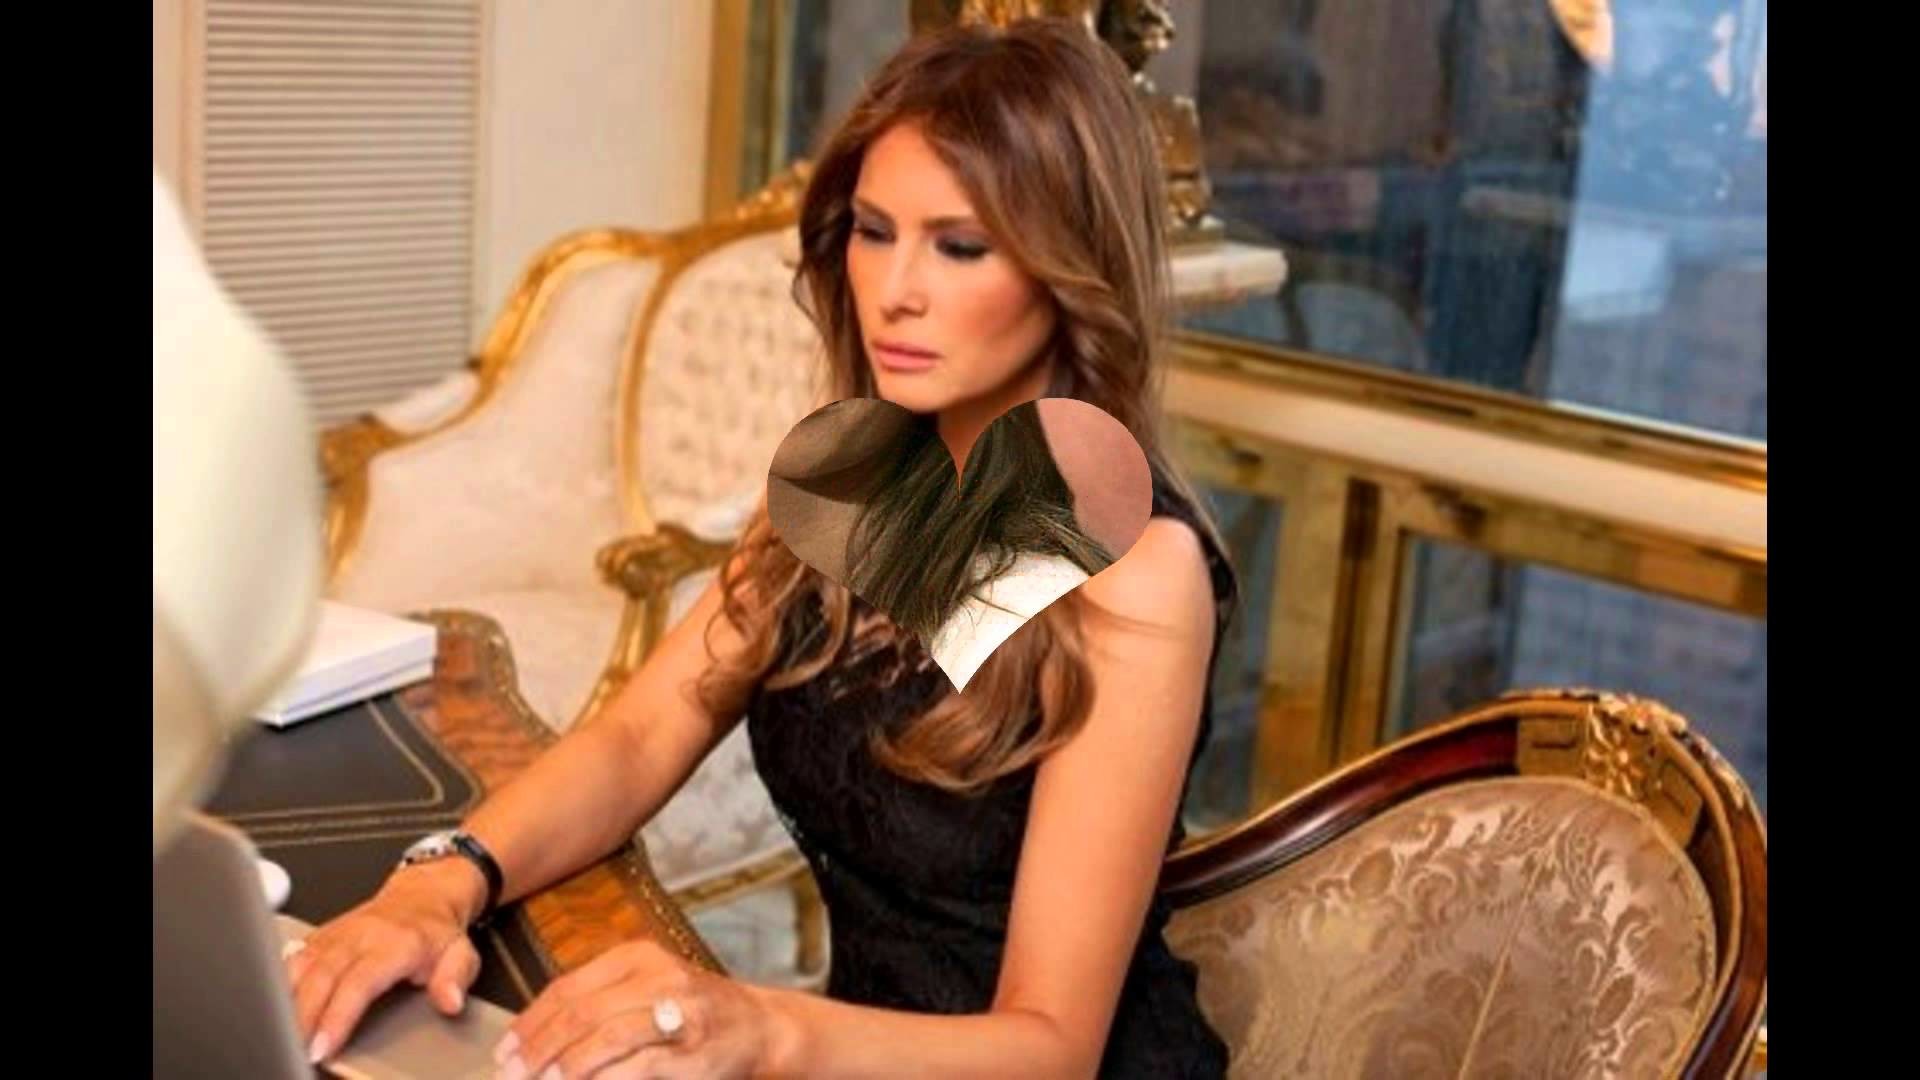 Donald Trump and Model Melania Trump Modeling Could Be Help Trump's Compaign